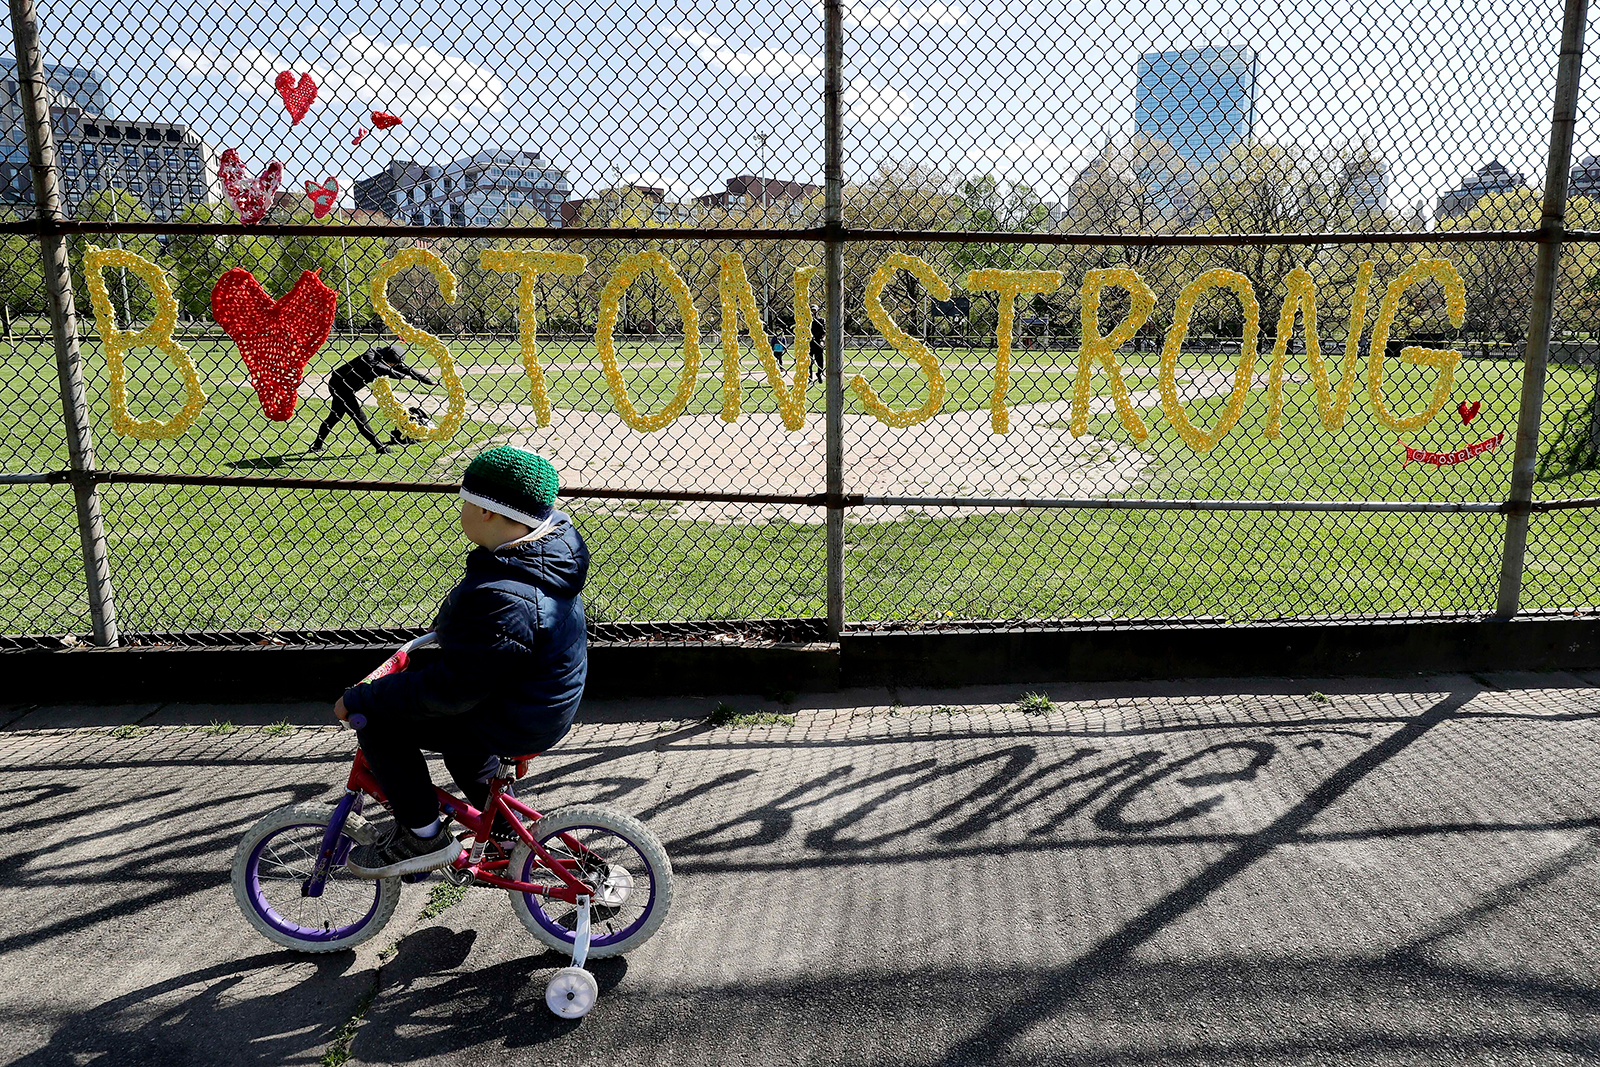 A child rides a bicycle with training wheels past a fence with the slogan "Boston Strong" crocheted into it, on Wednesday, May 13, in Boston.